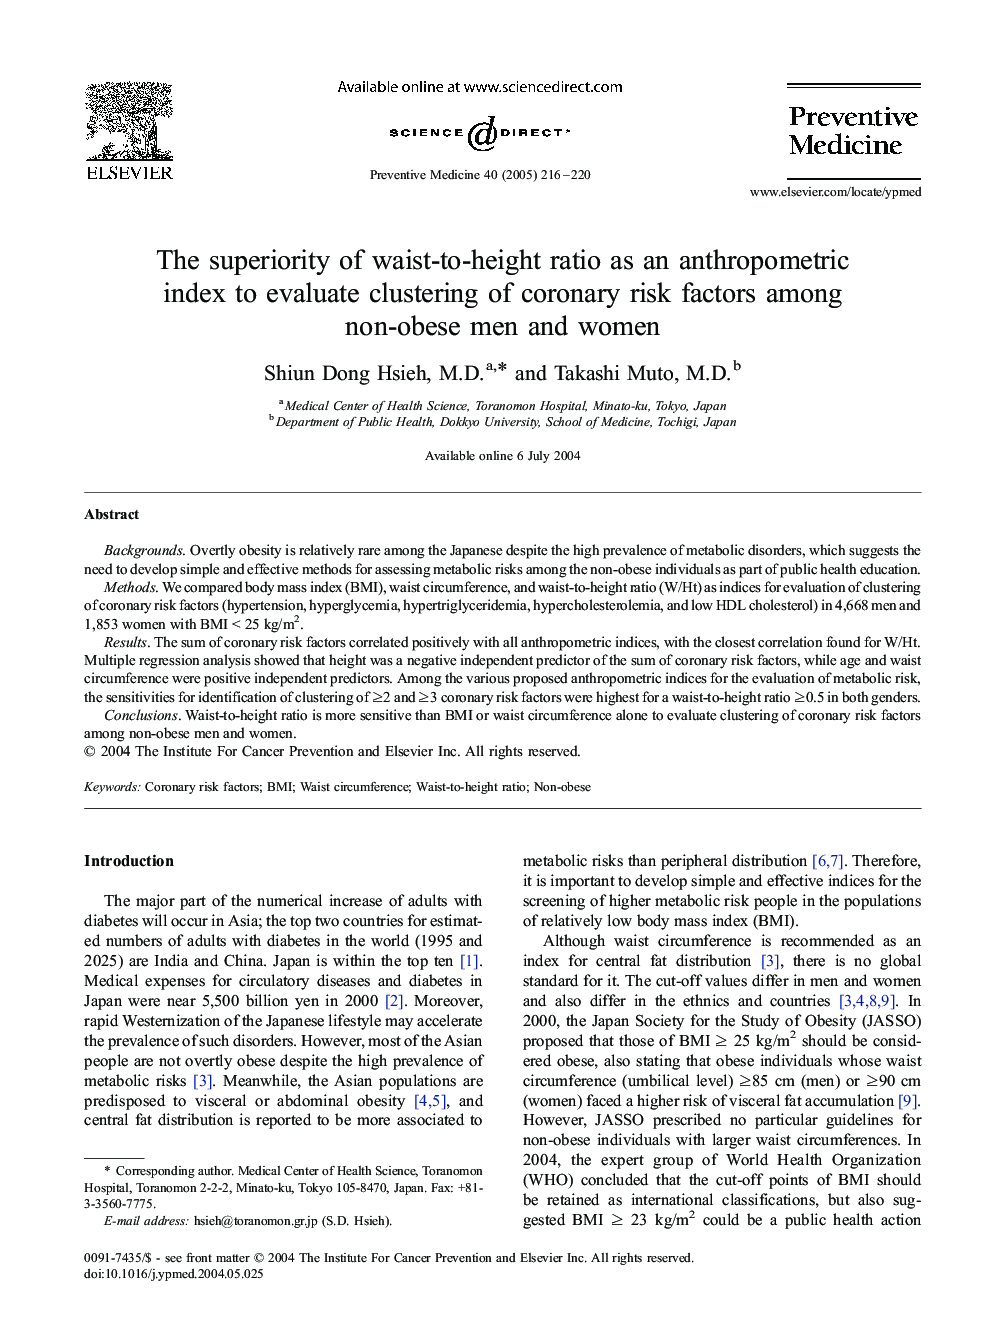 The superiority of waist-to-height ratio as an anthropometric index to evaluate clustering of coronary risk factors among non-obese men and women